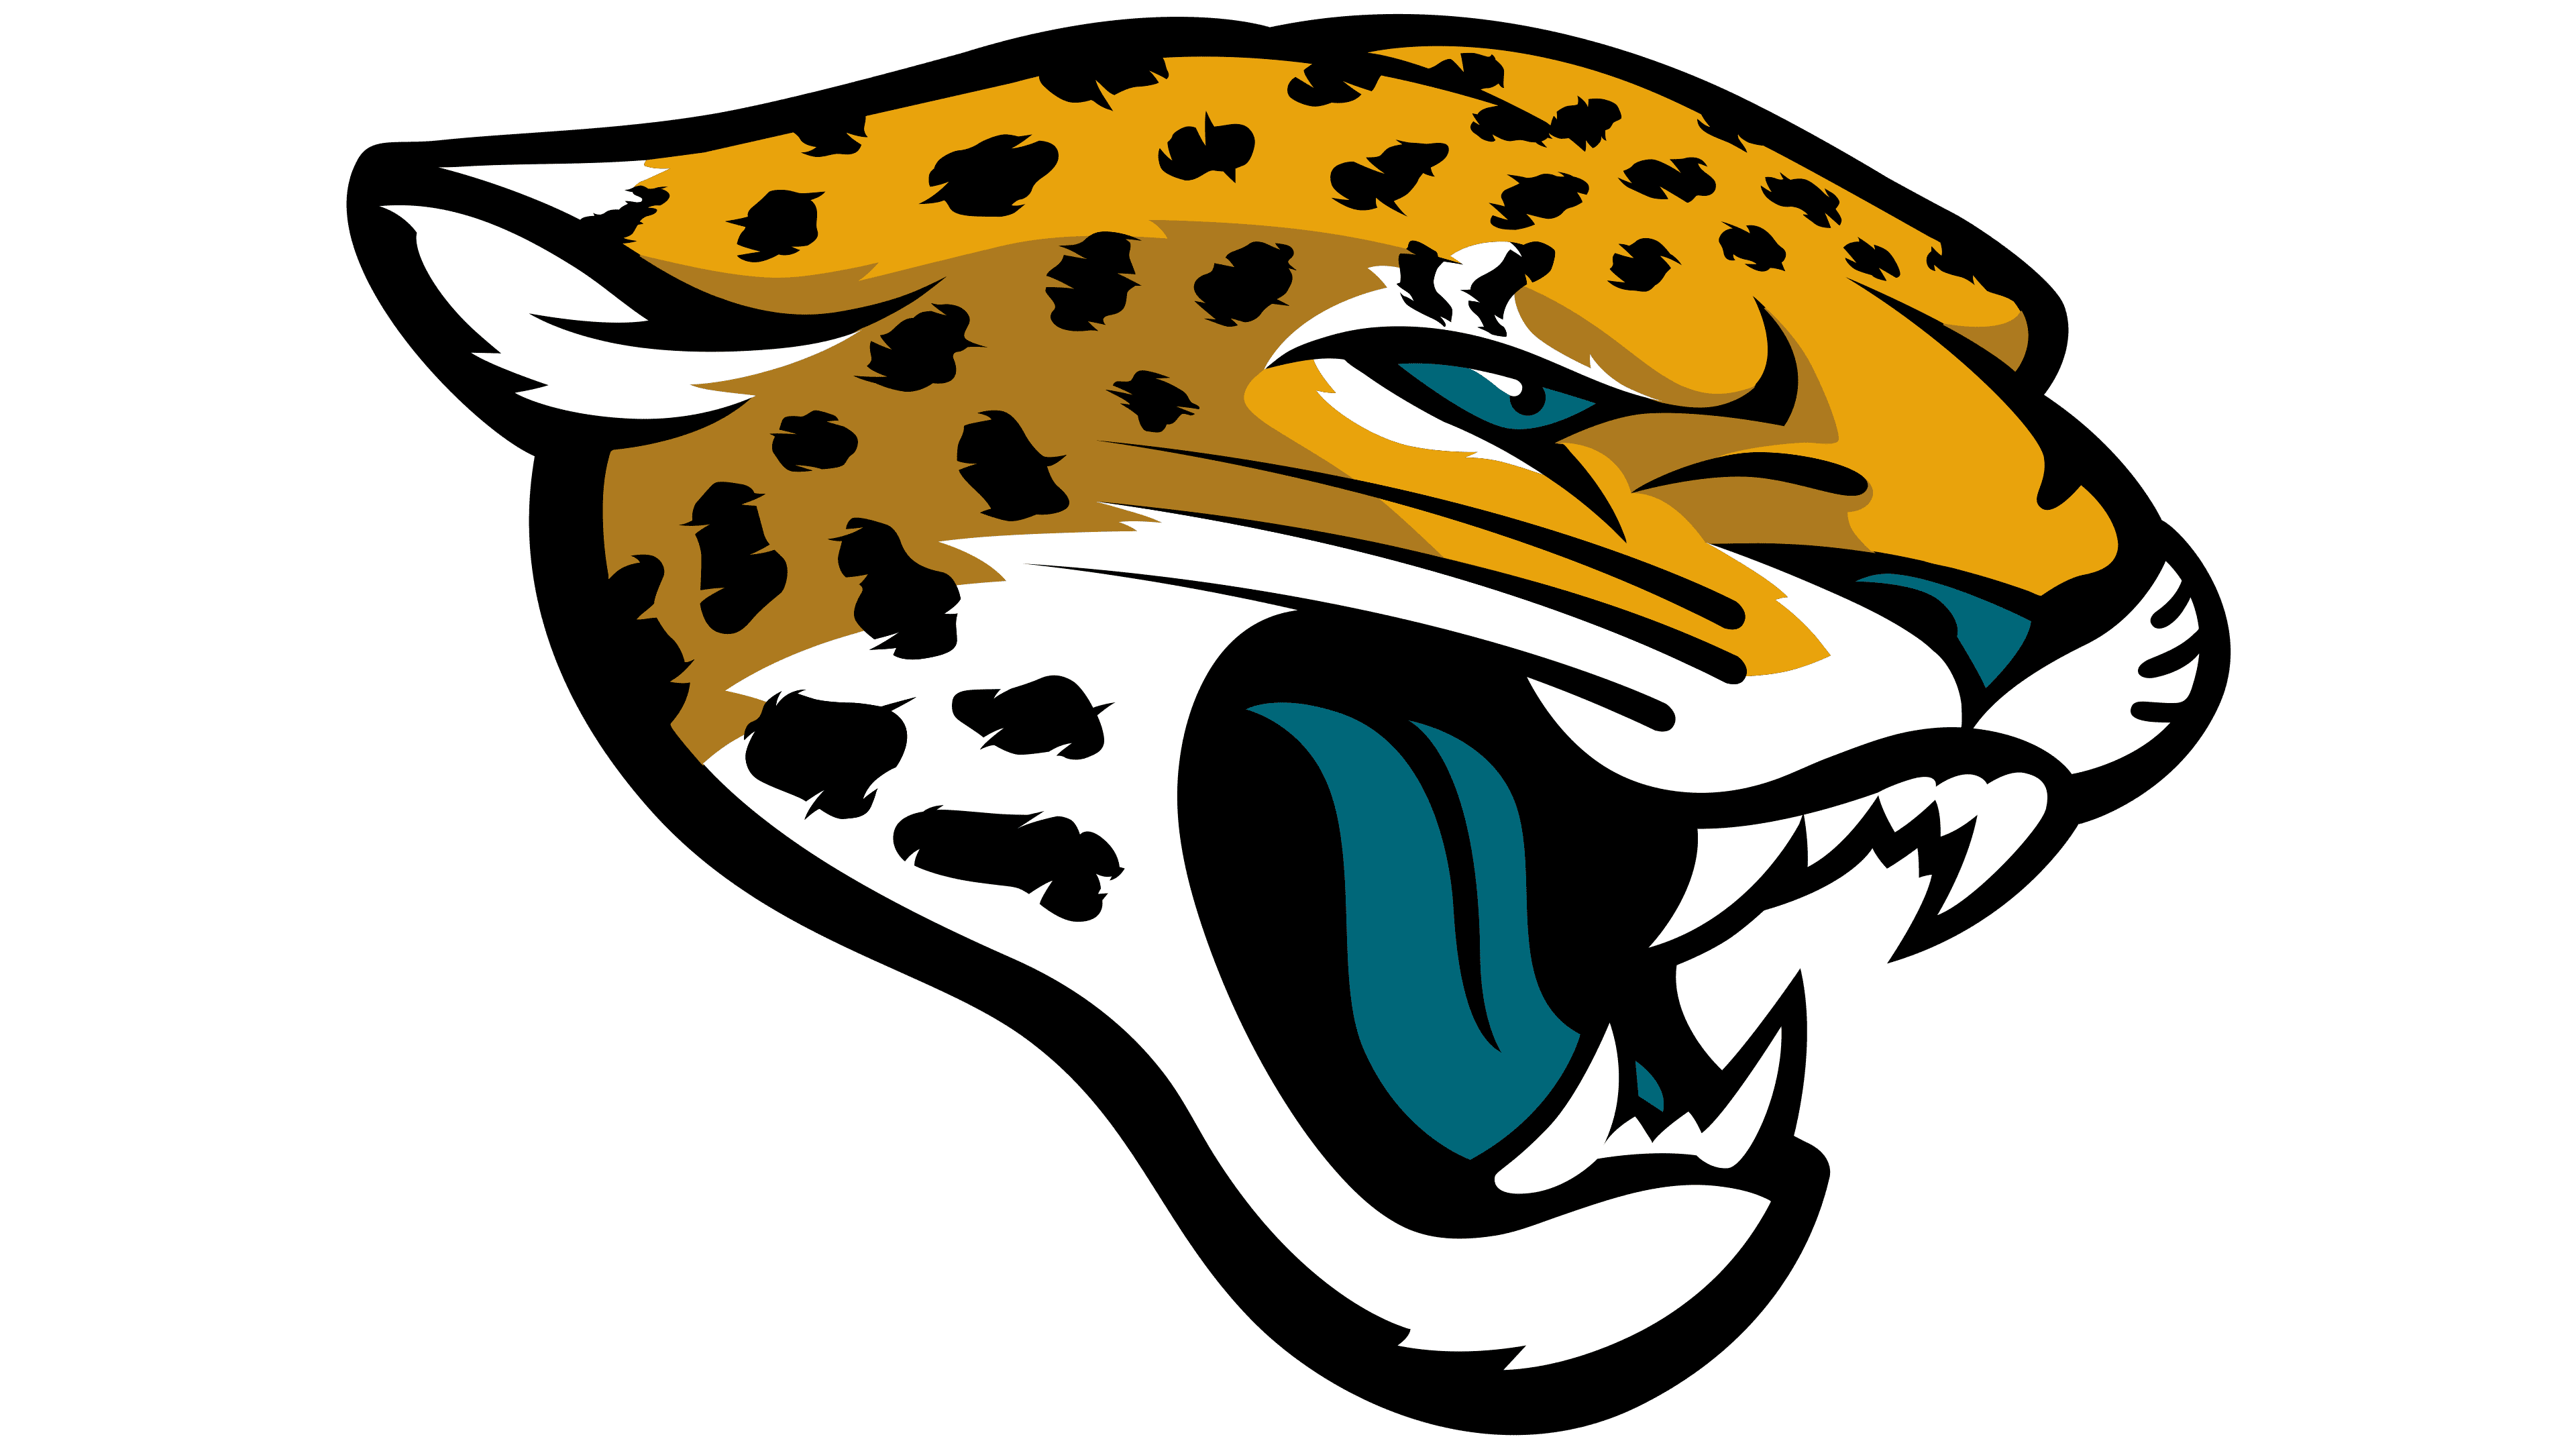 ”Panthers Mogul $300,000 Penalty! Find Out Why He Threw A Drink At Jaguars Fans-The Scandal Unveiled!”